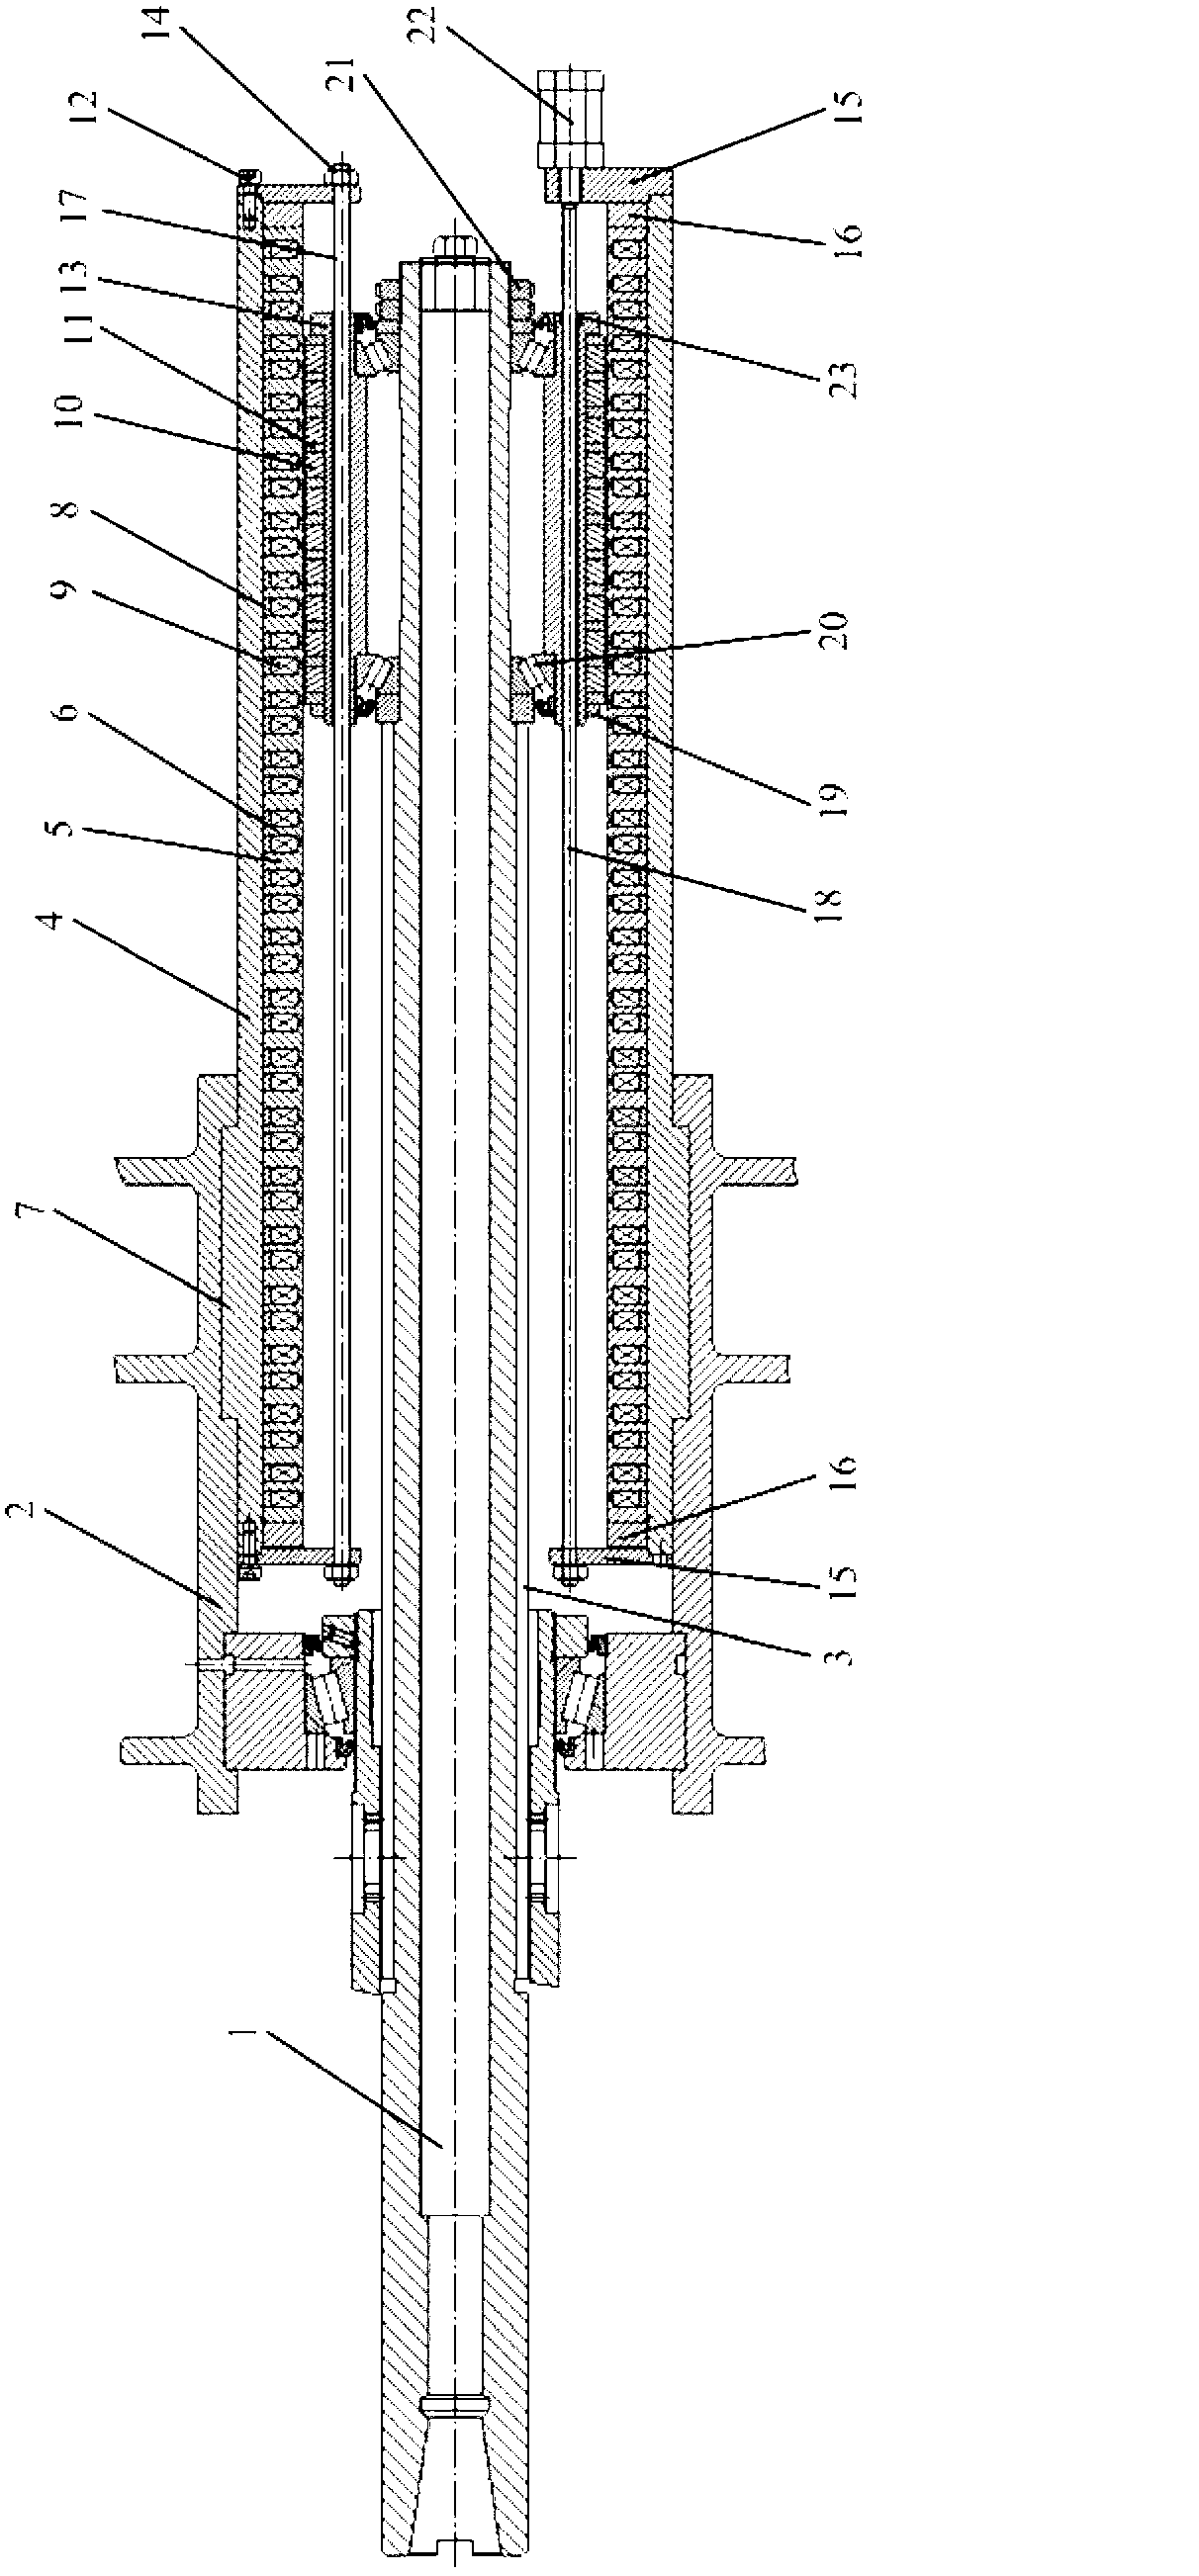 Cylindrical linear motor with ring gears of different widths for axial feed